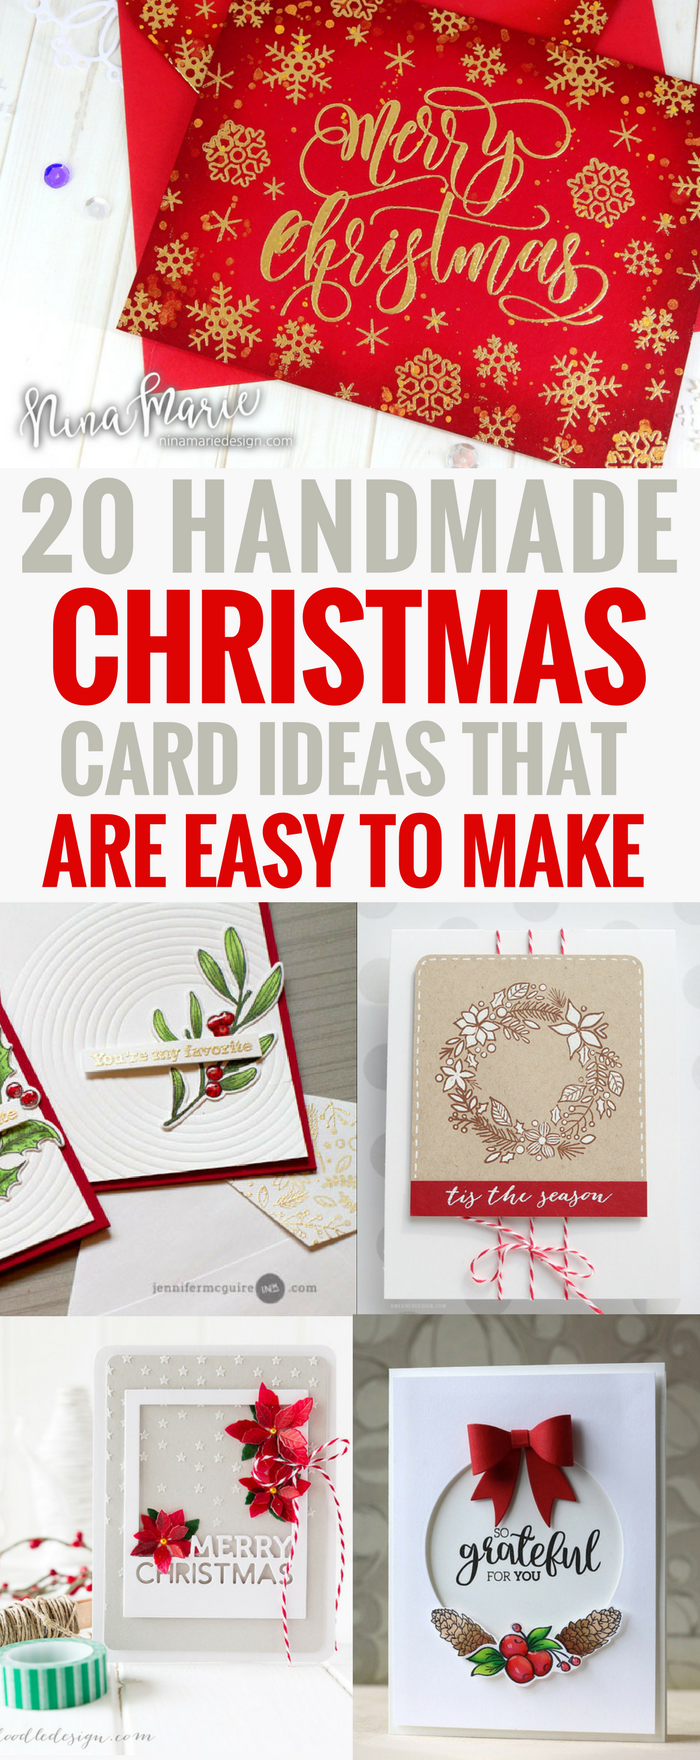 Handmade Christmas Cards Ideas That Are Easy to Make DIY Winter Holiday Spirit Paper Craft Greeting Elegant 